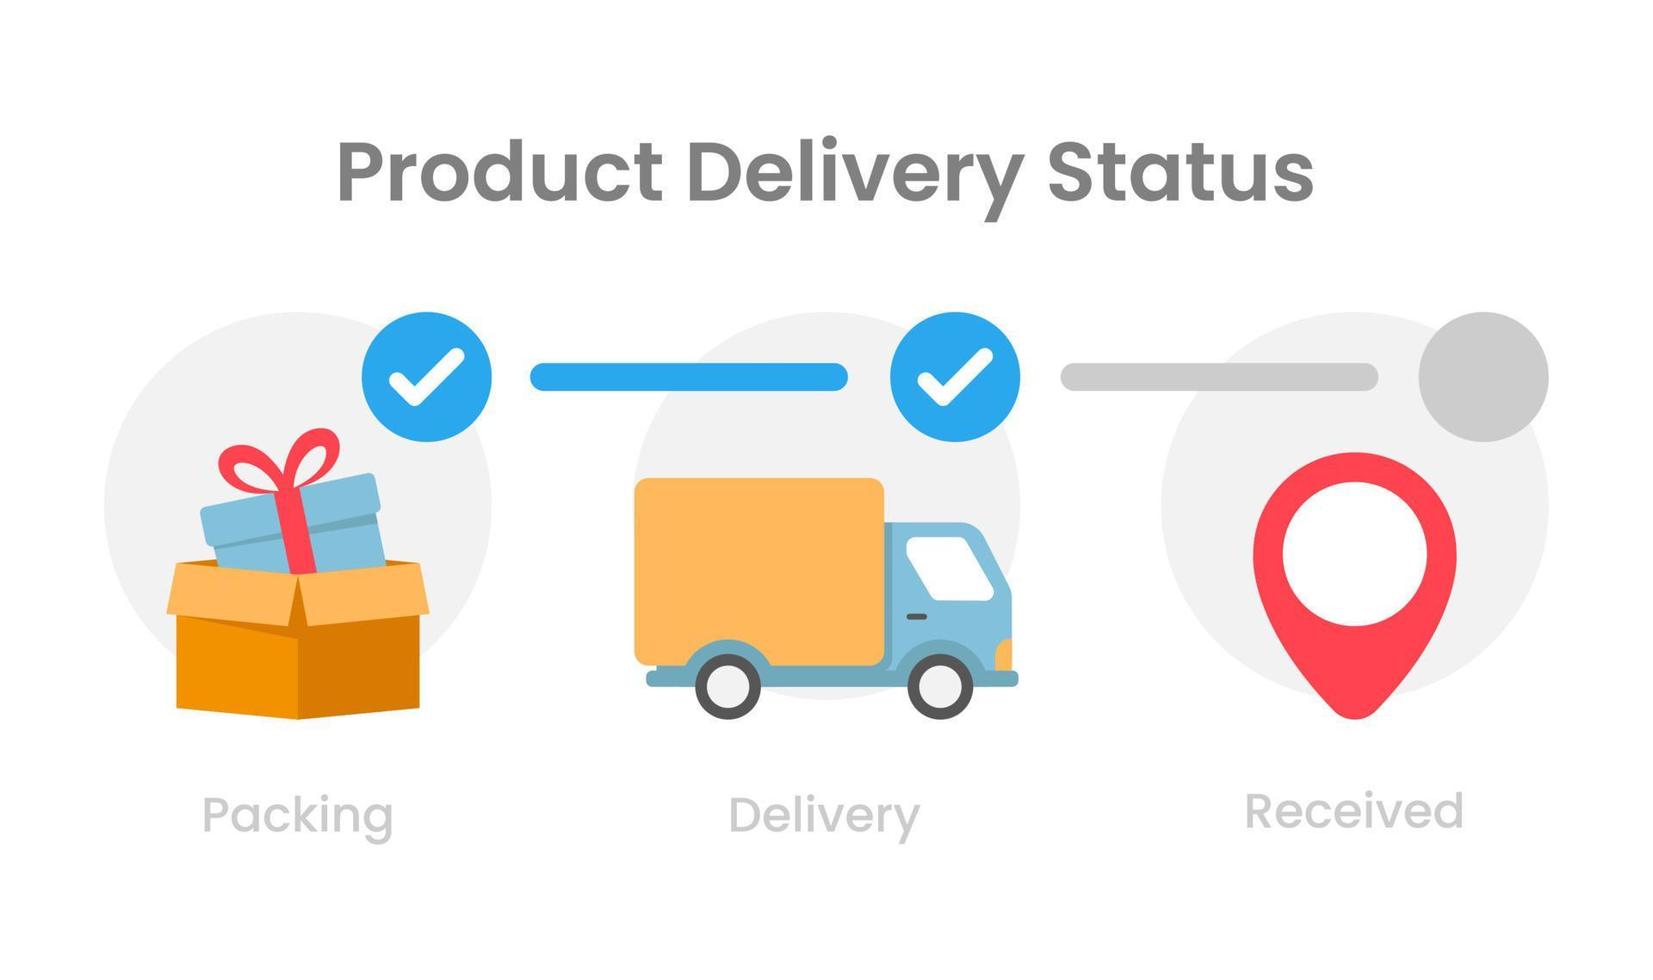 progress bar of product delivery status concept illustration flat design vector eps10. modern graphic element for landing page, empty state ui, infographic, icon